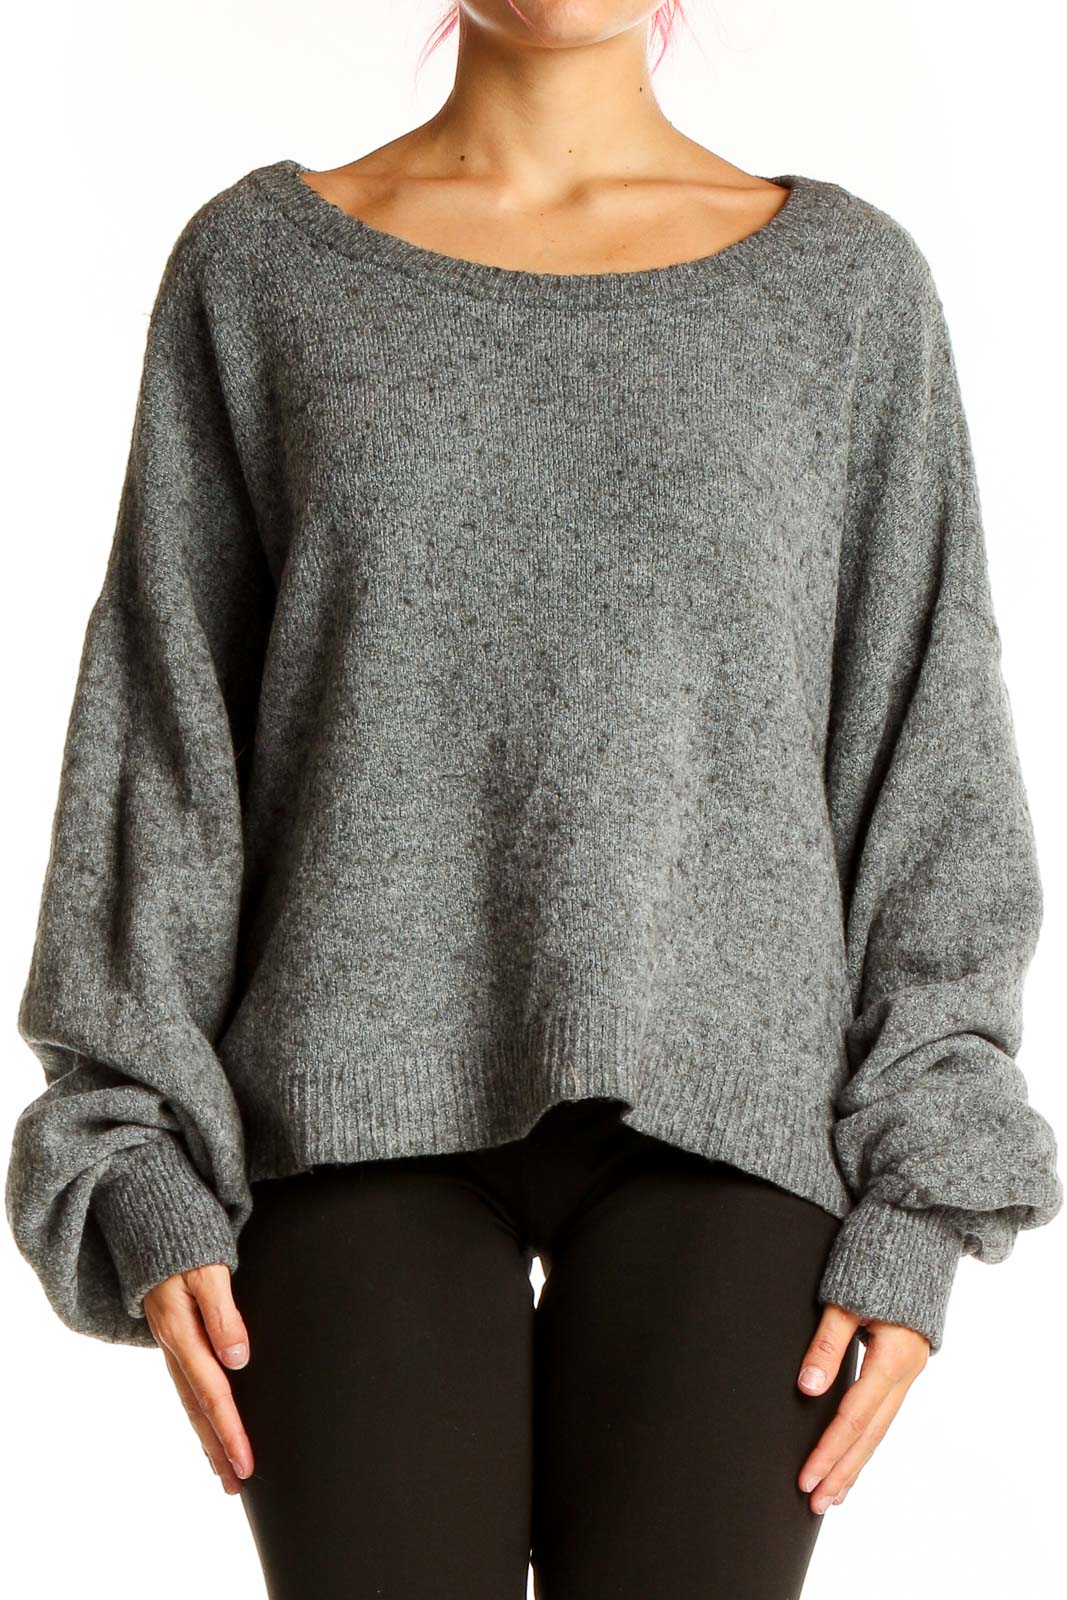 Grey Black Texture Sweater Front